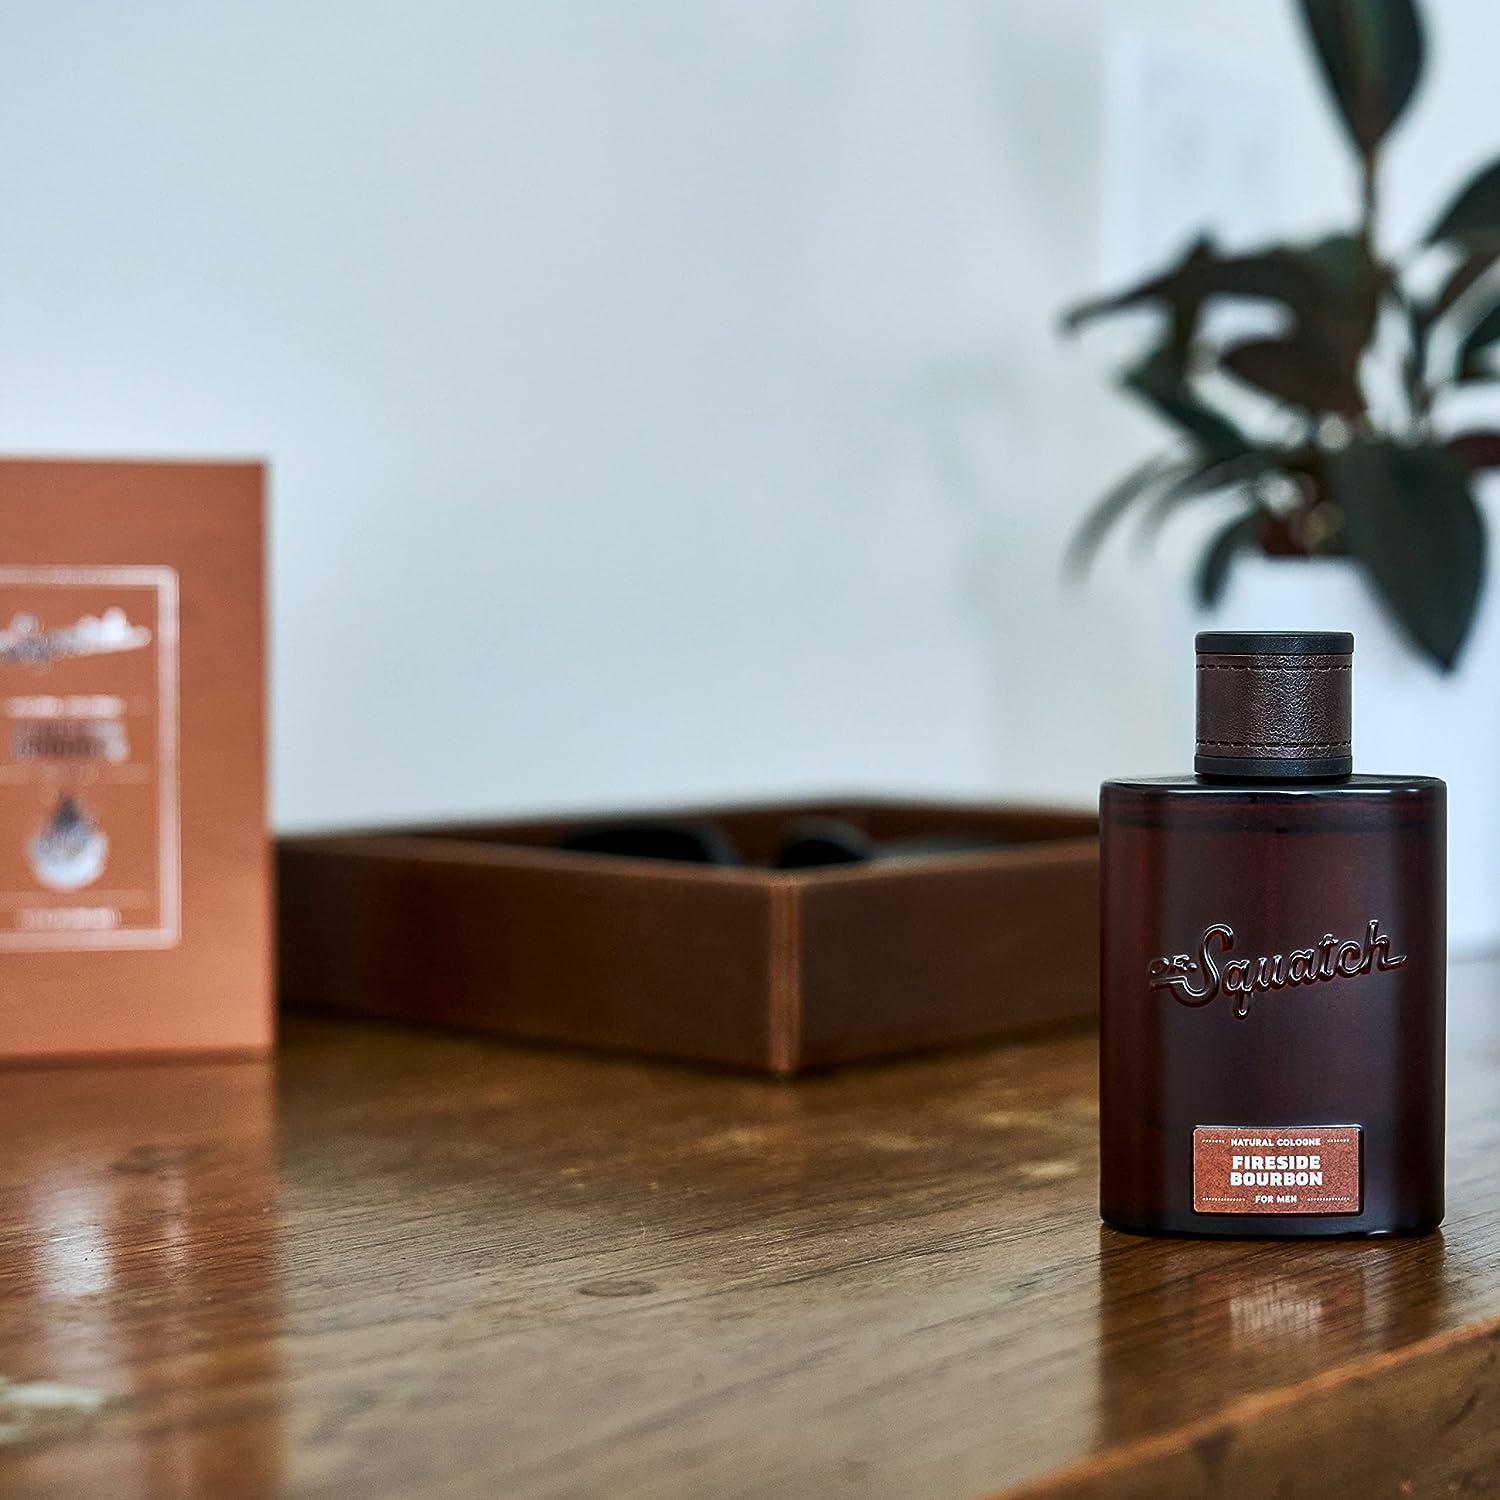 Dr. Squatch Men's Cologne Fireside Bourbon - Natural Cologne made with  sustainably-sourced ingredients - Manly fragrance of cedarwood clove and  patchouli - Inspired by Wood Barrel Bourbon Bar Soap